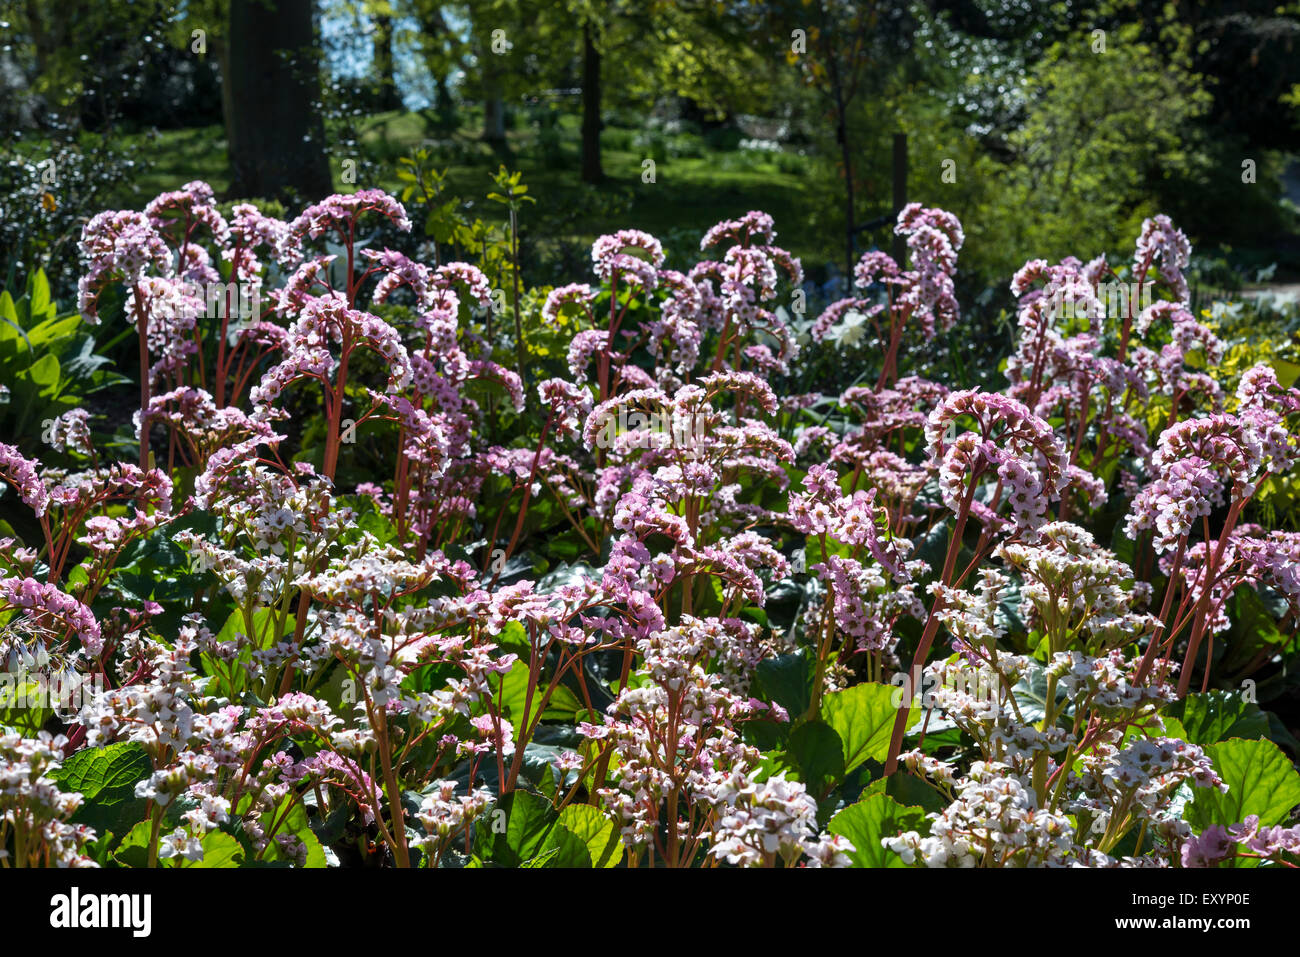 Bergenia Cordifolia with pale pink flowers in a spring garden. Stock Photo